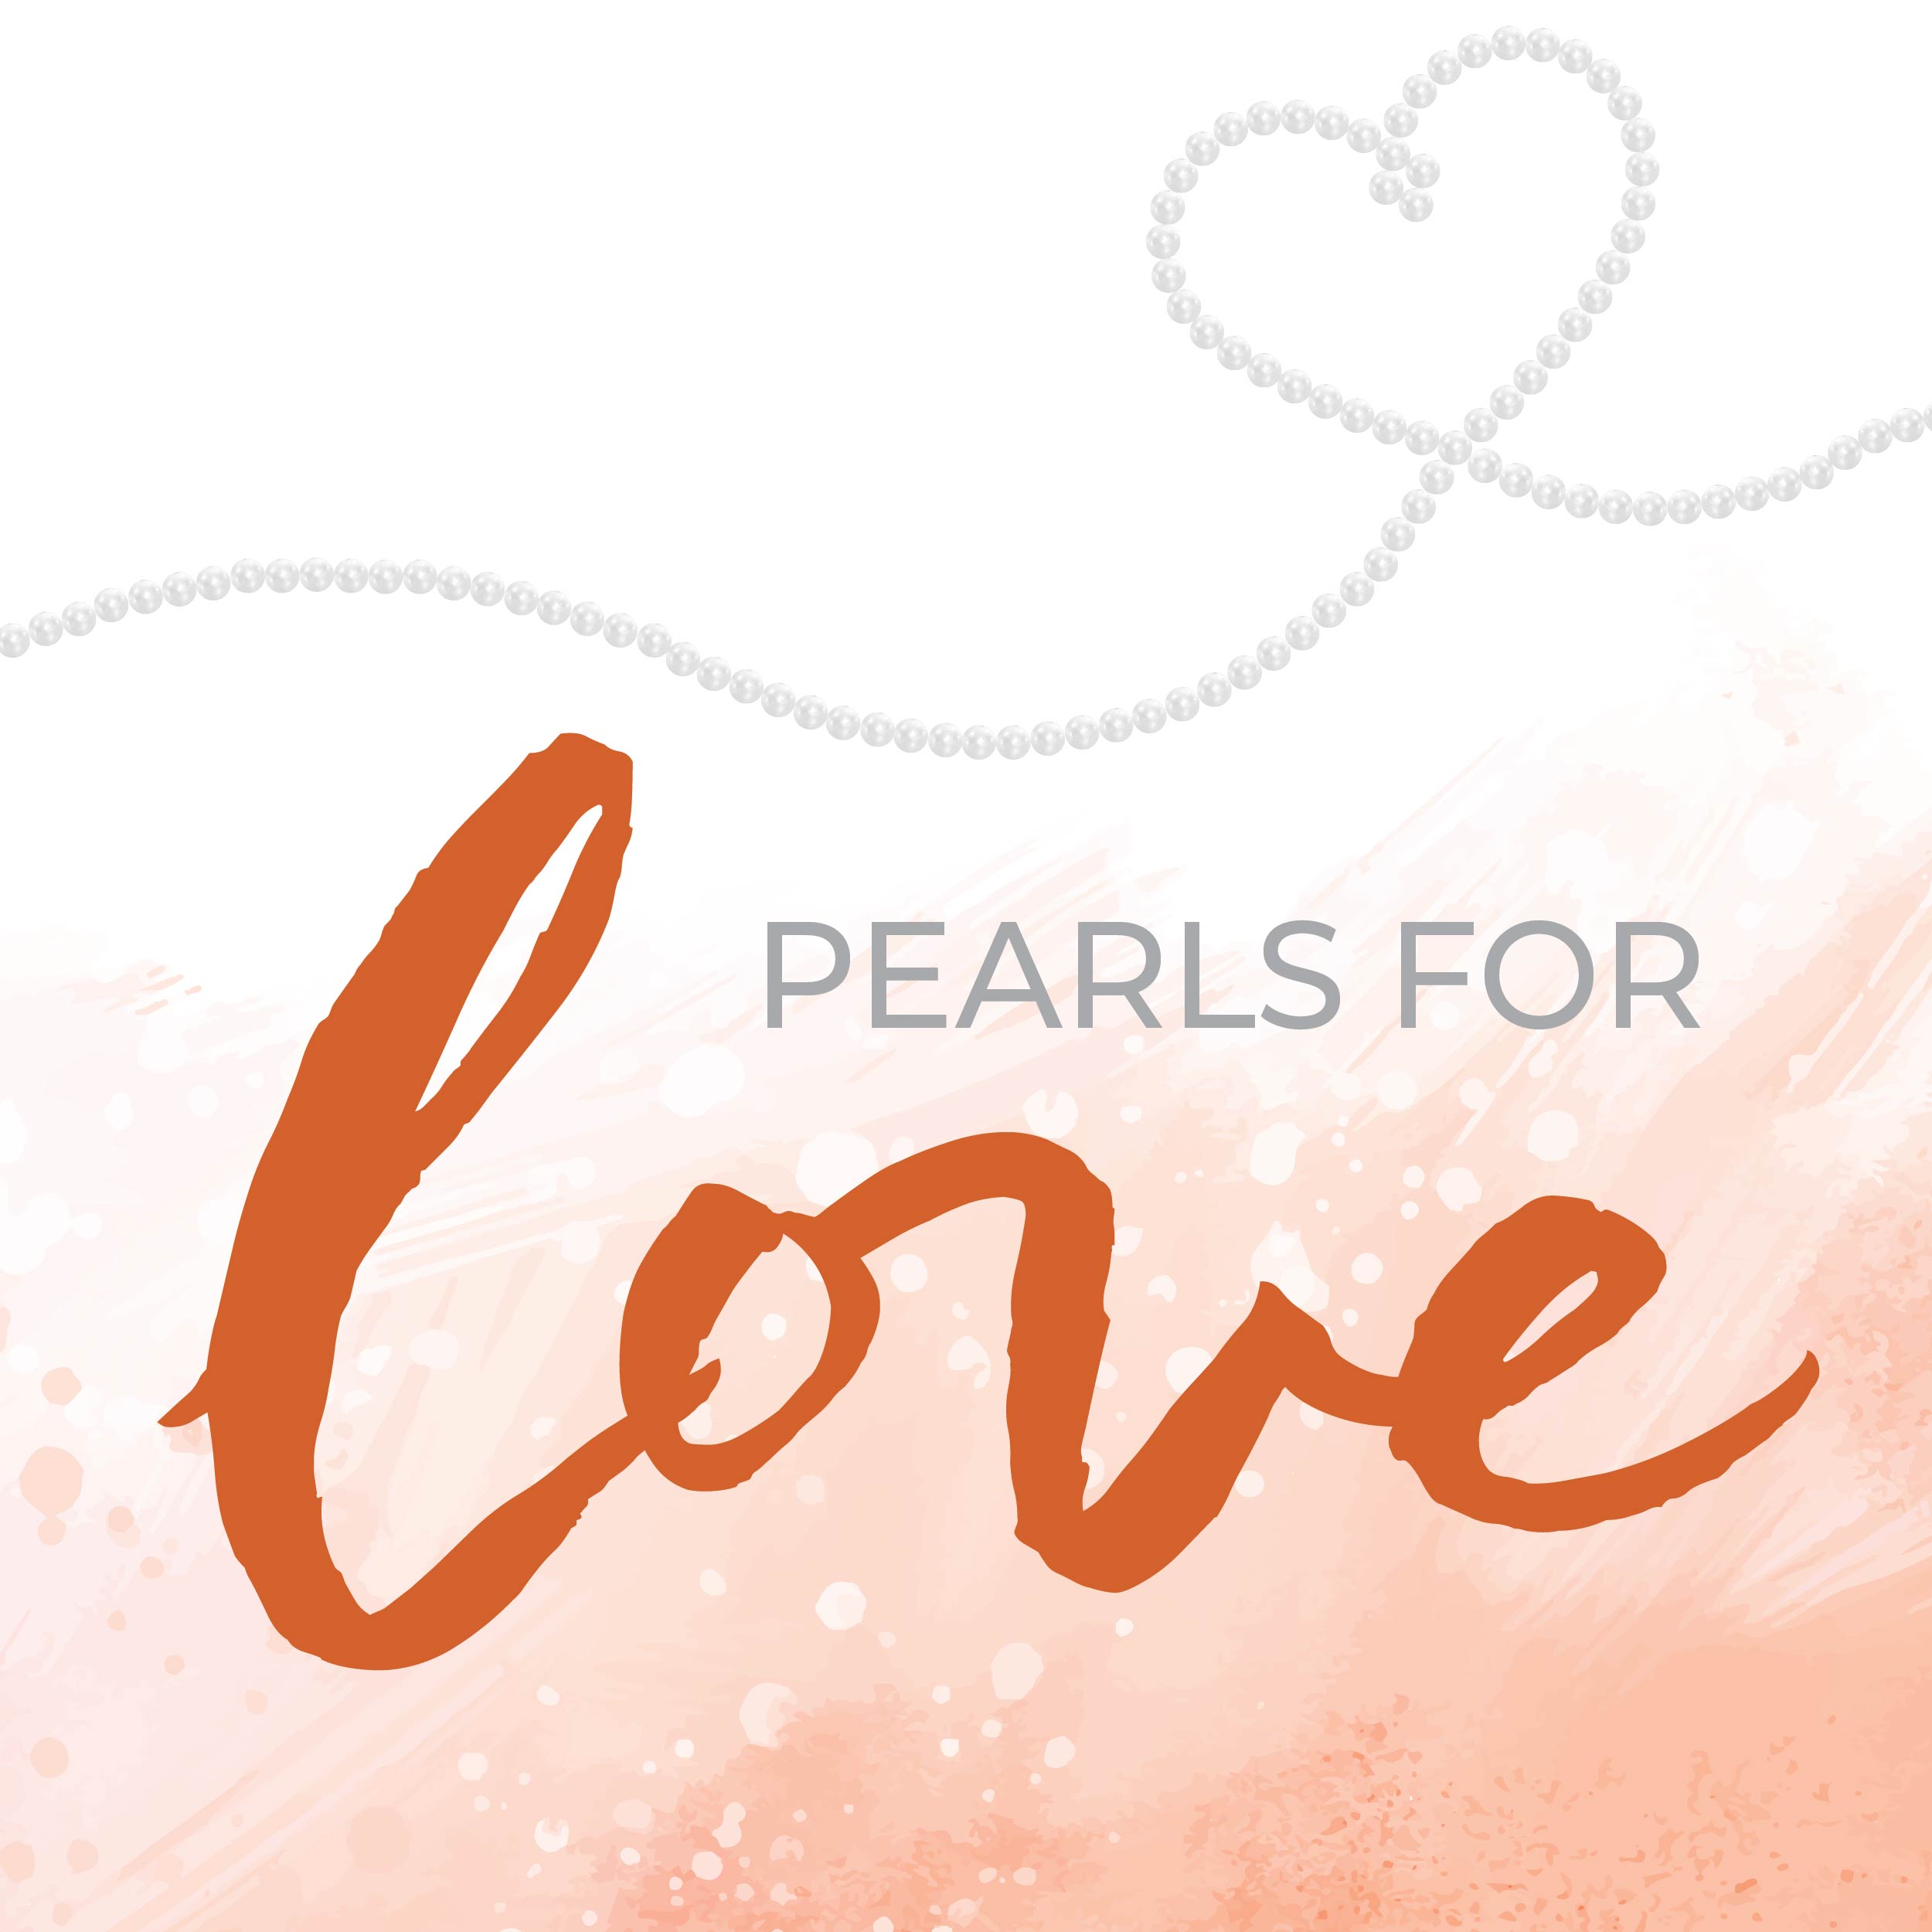 Pearls for love